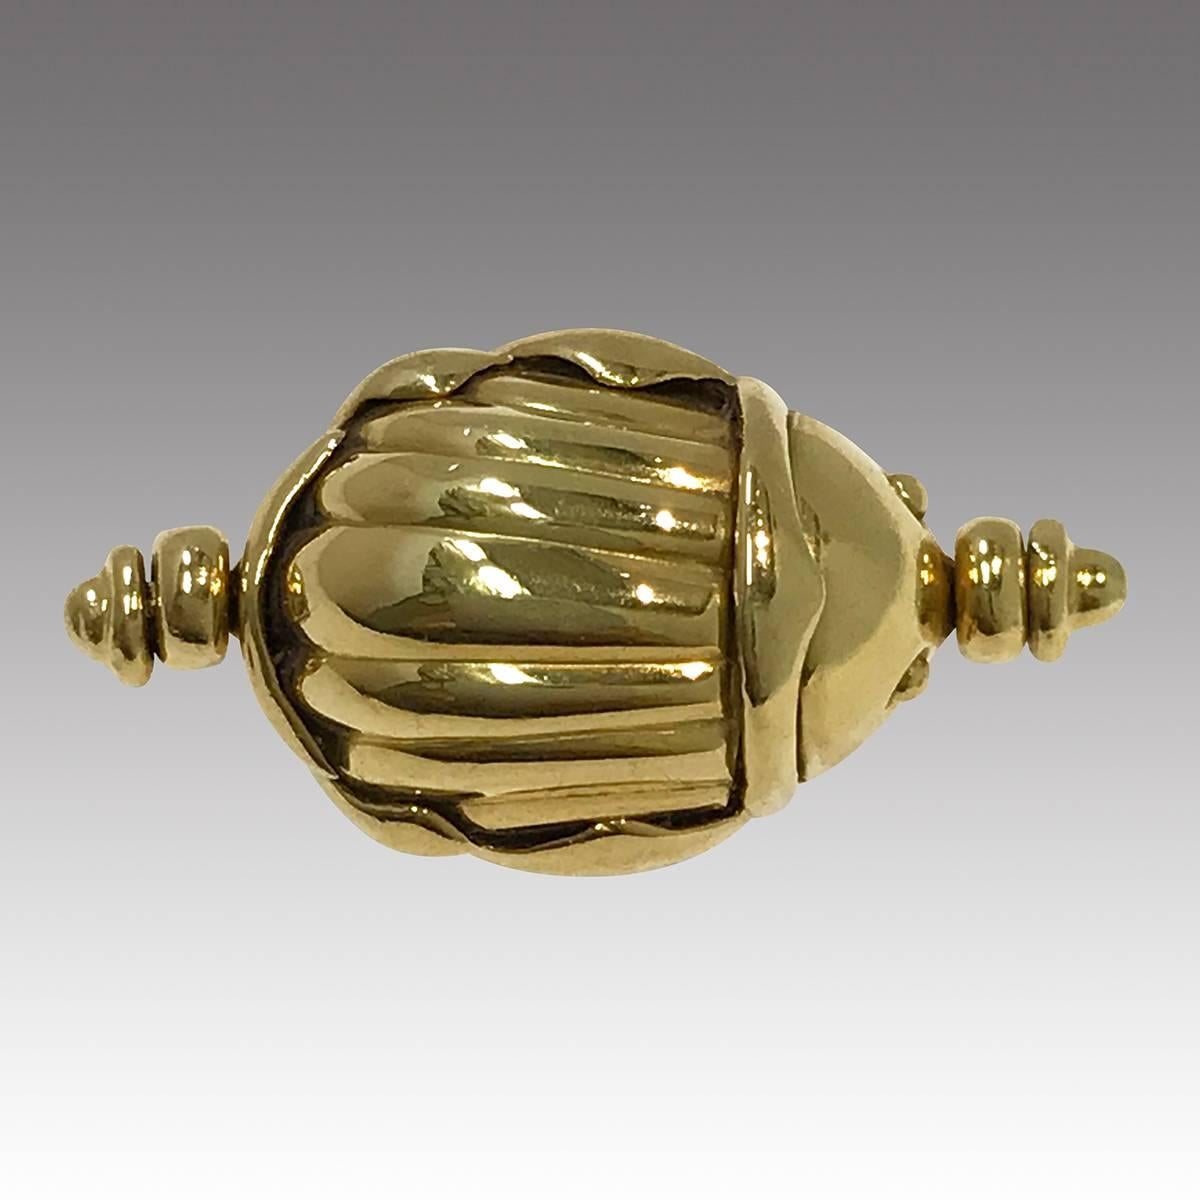 Tiffany & Co. Vintage 18k Gold Scarab Flip Ring. This famous maker ring showcases a scarab beetle with a ridged body and two bead eyes on the top of the ring and on the flip-side of the scarab body is stamped “© T & Co. 750”. The scarab beetle